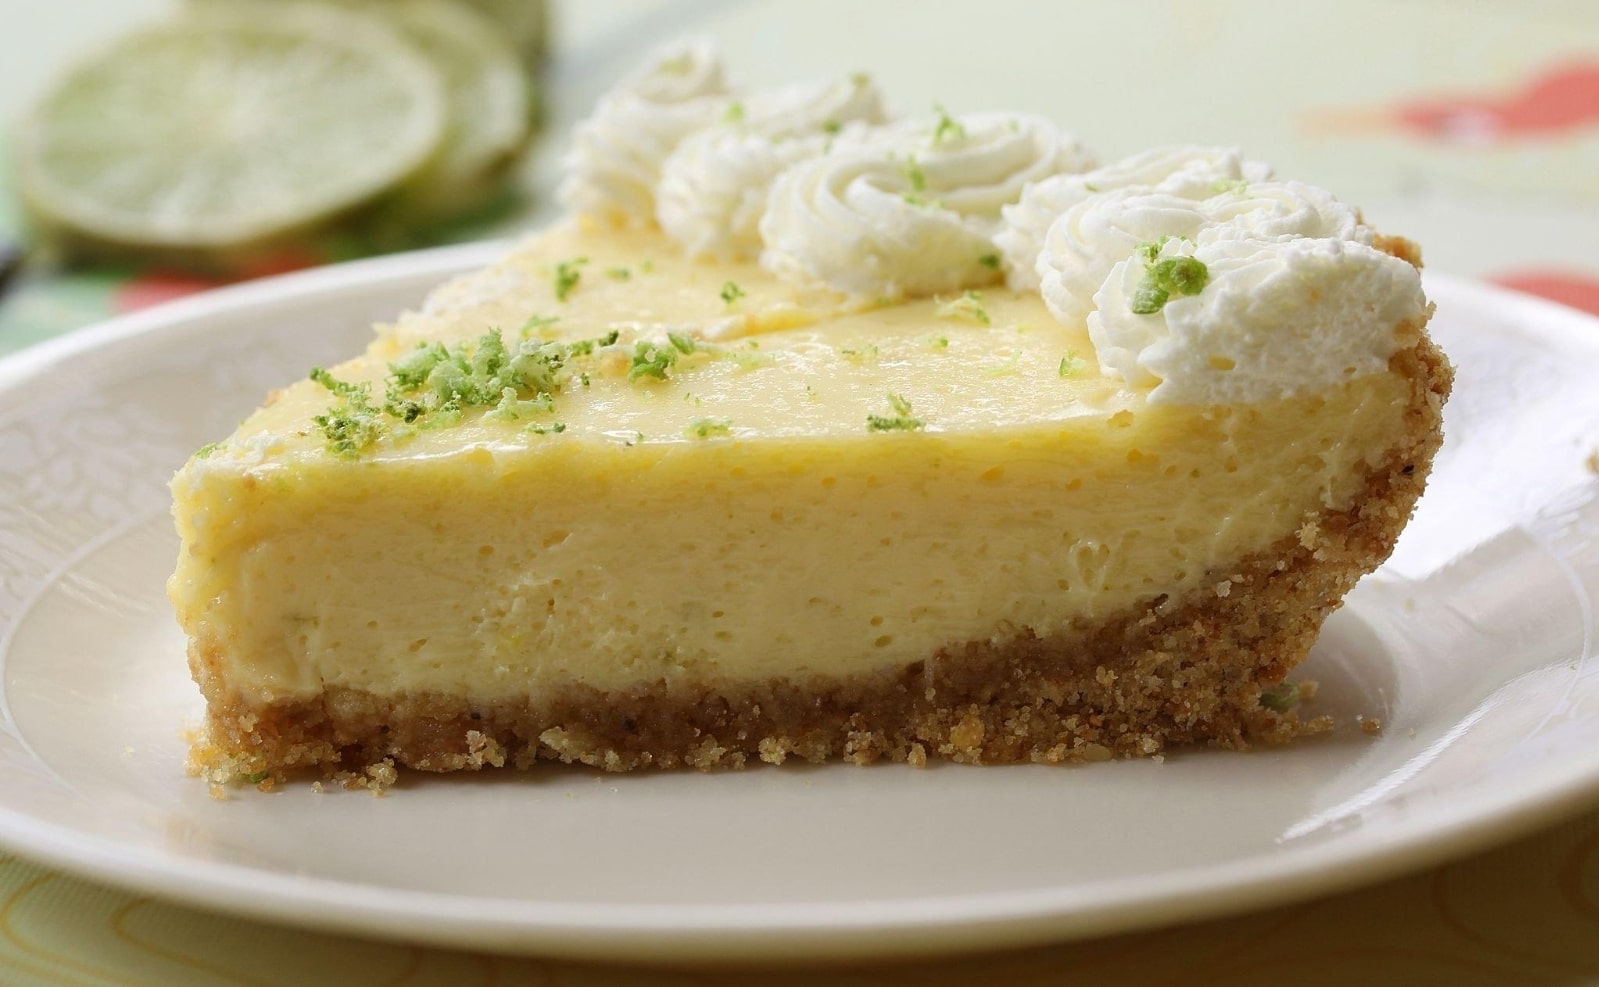 How do you thicken a Key lime pie?